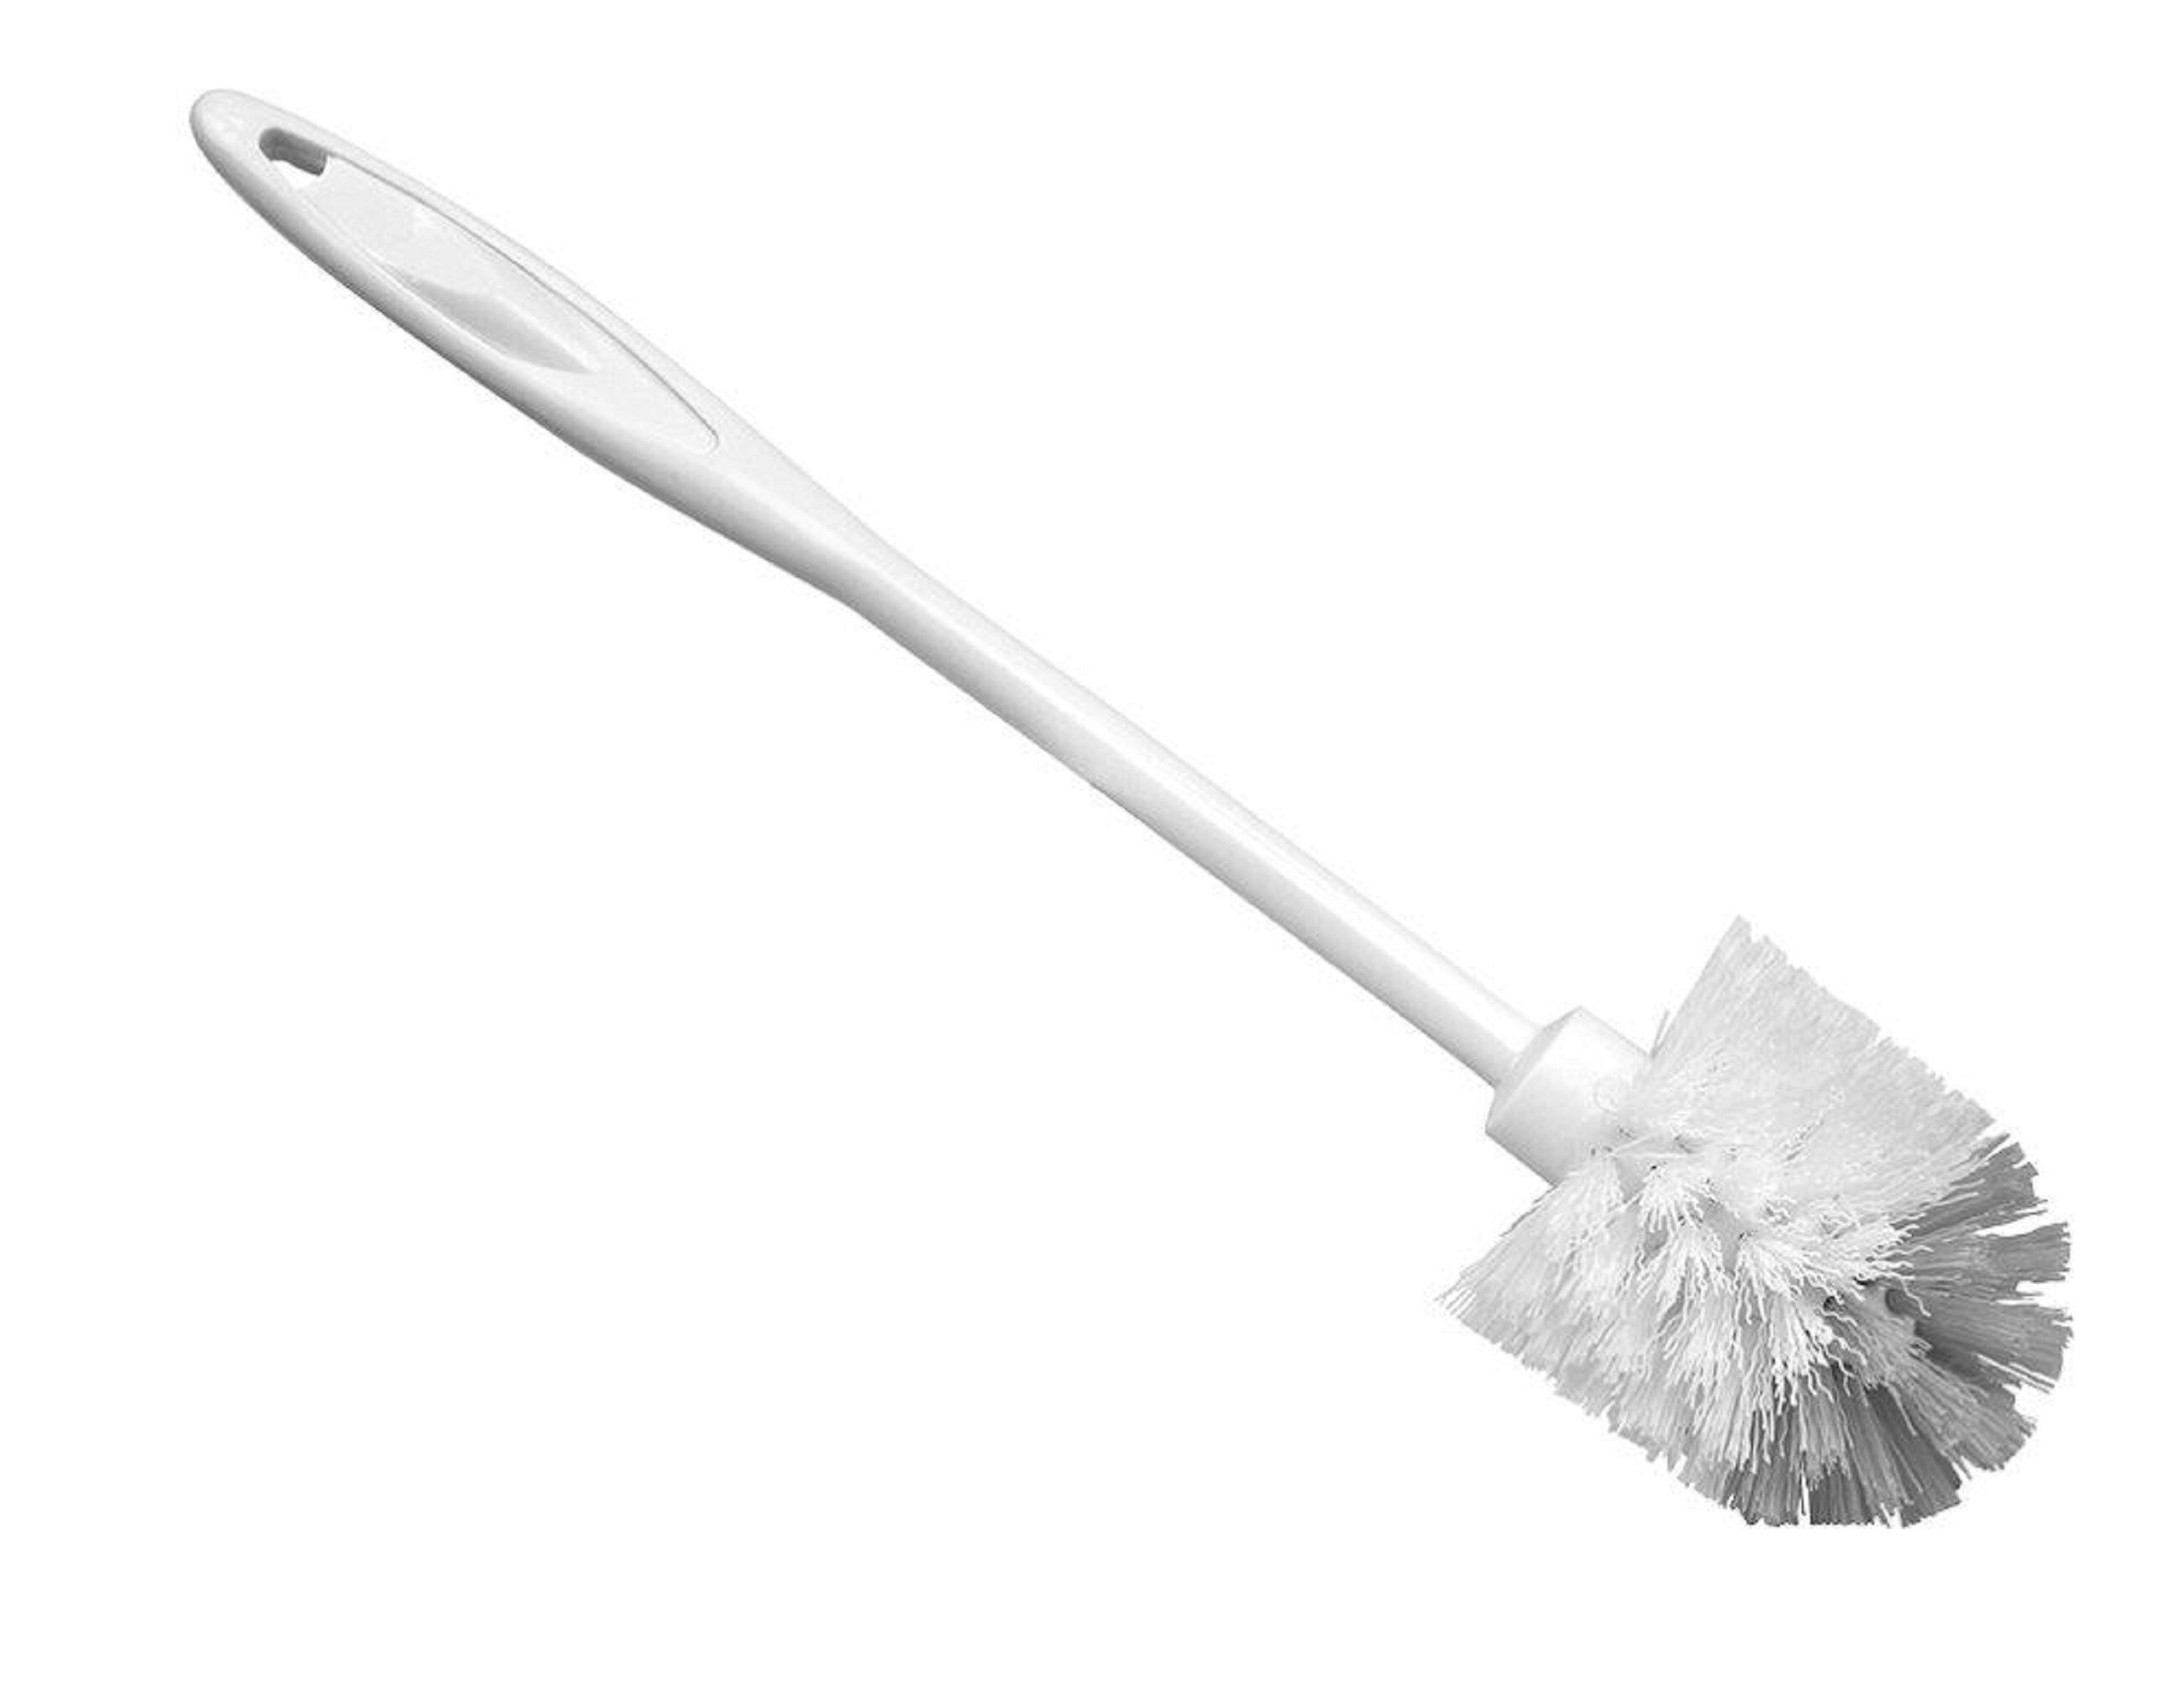 Details about   Toilet Brush Holder Set Double-Sided Brush Head Deep Cleaning with Fixed Base 